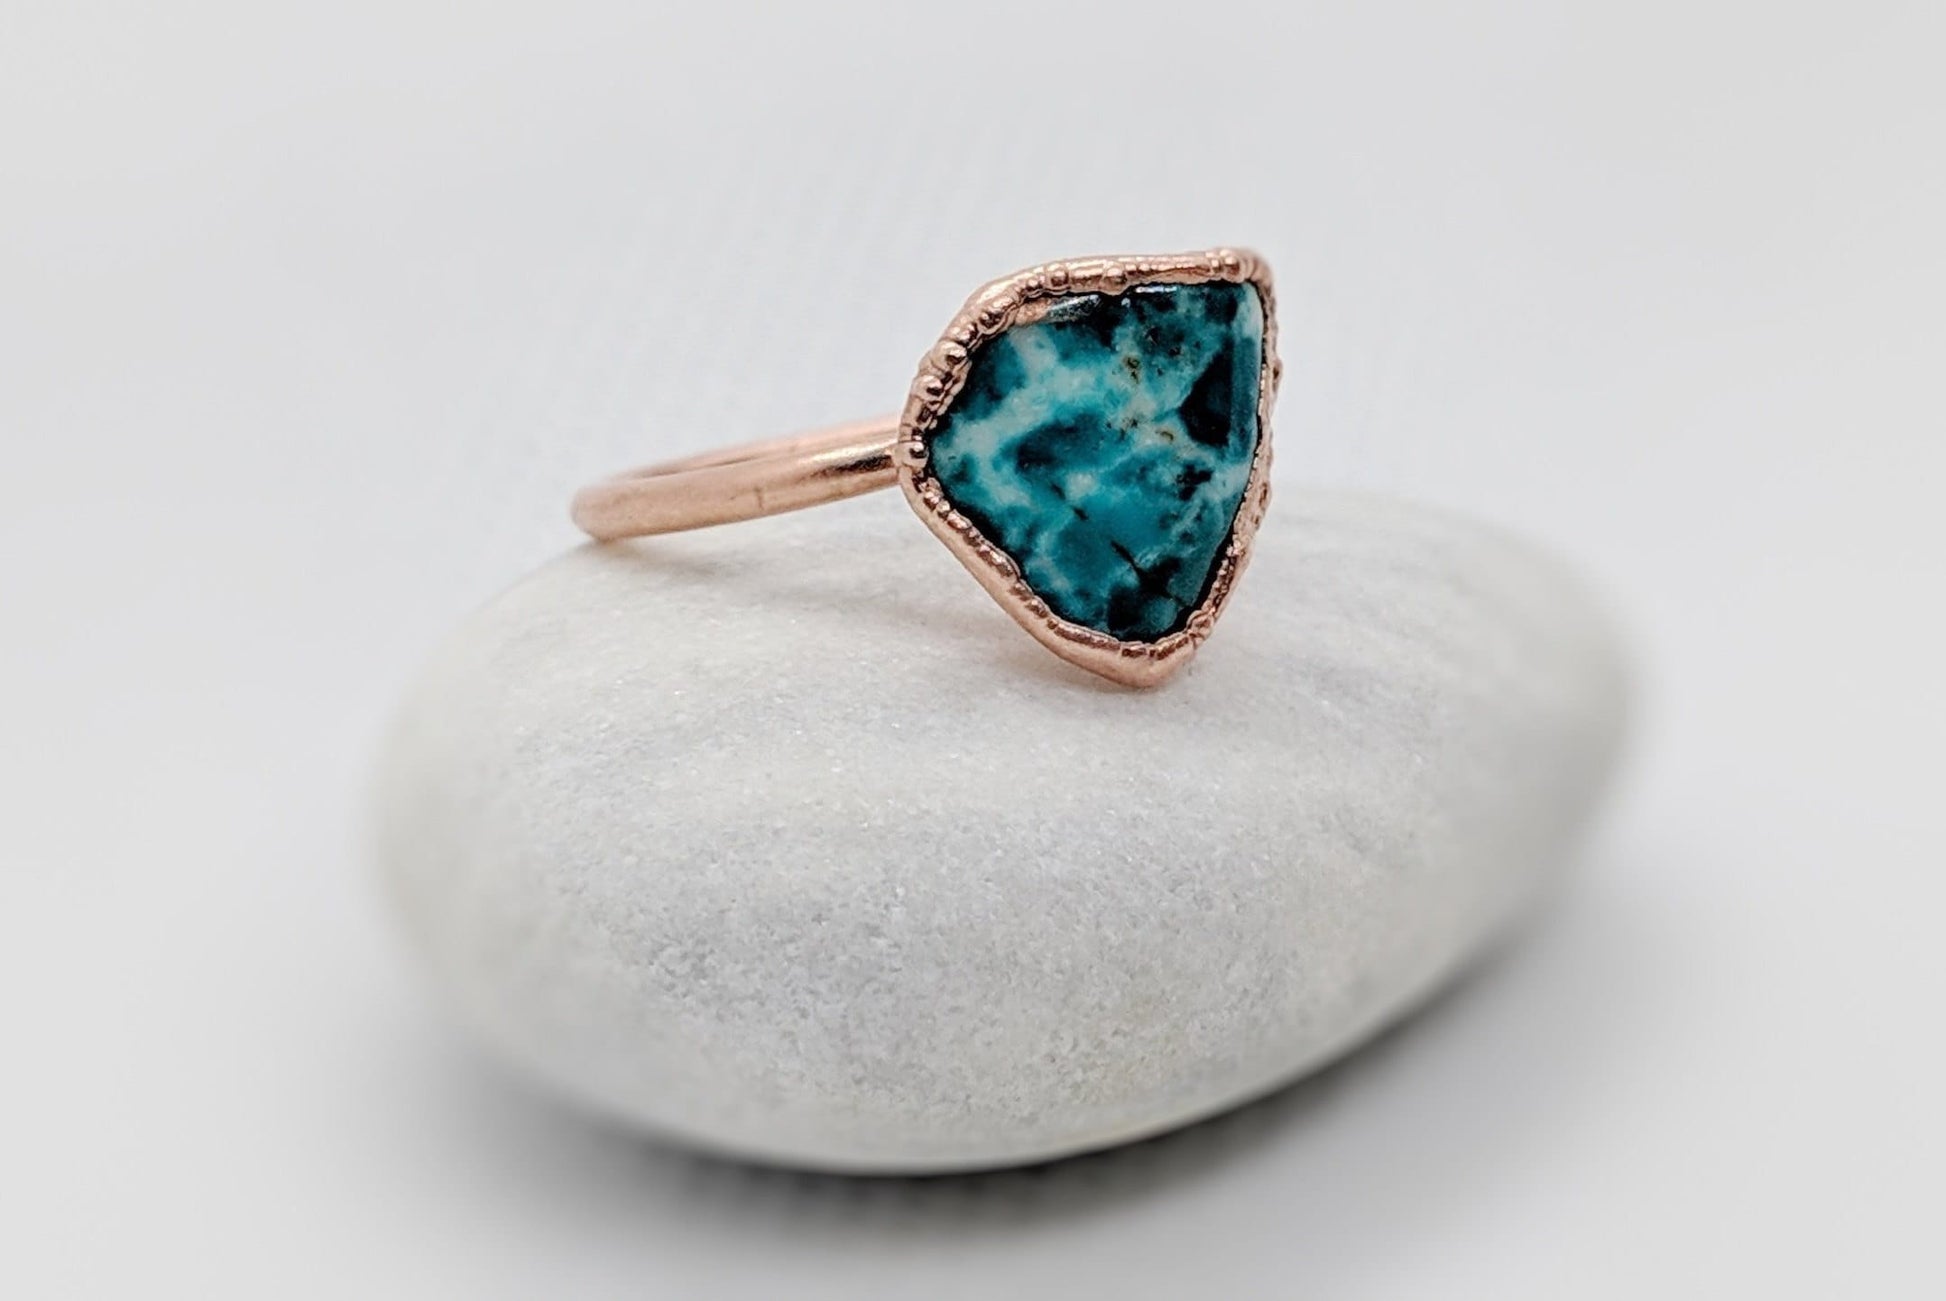 Natural rough Turquoise ring in unique 18k gold setting